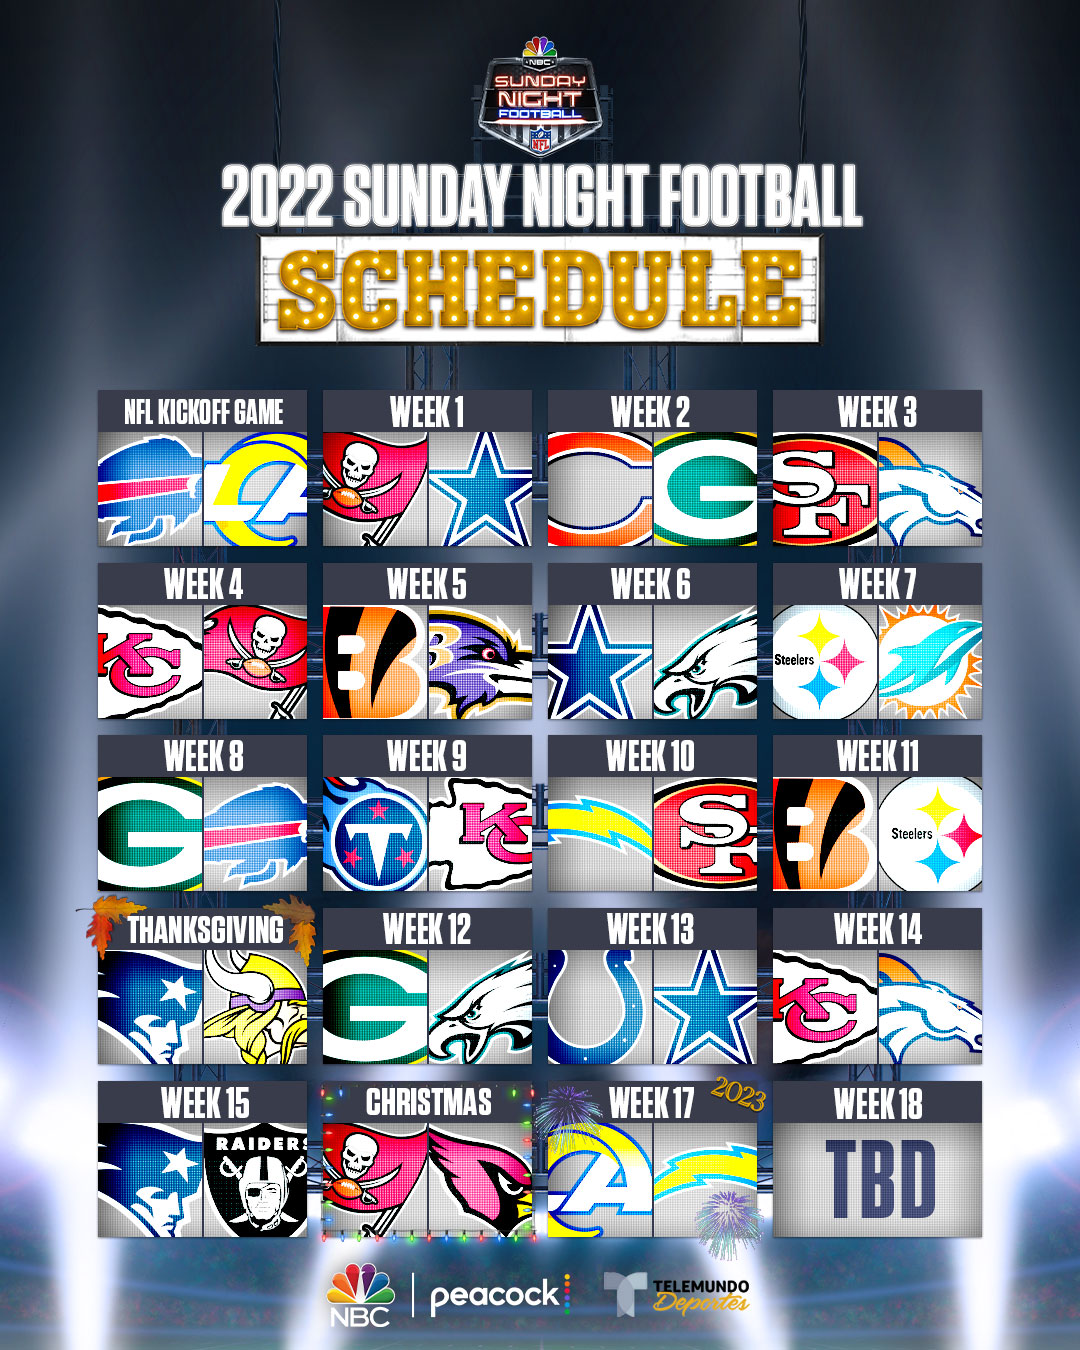 who is playing tonight on nfl football